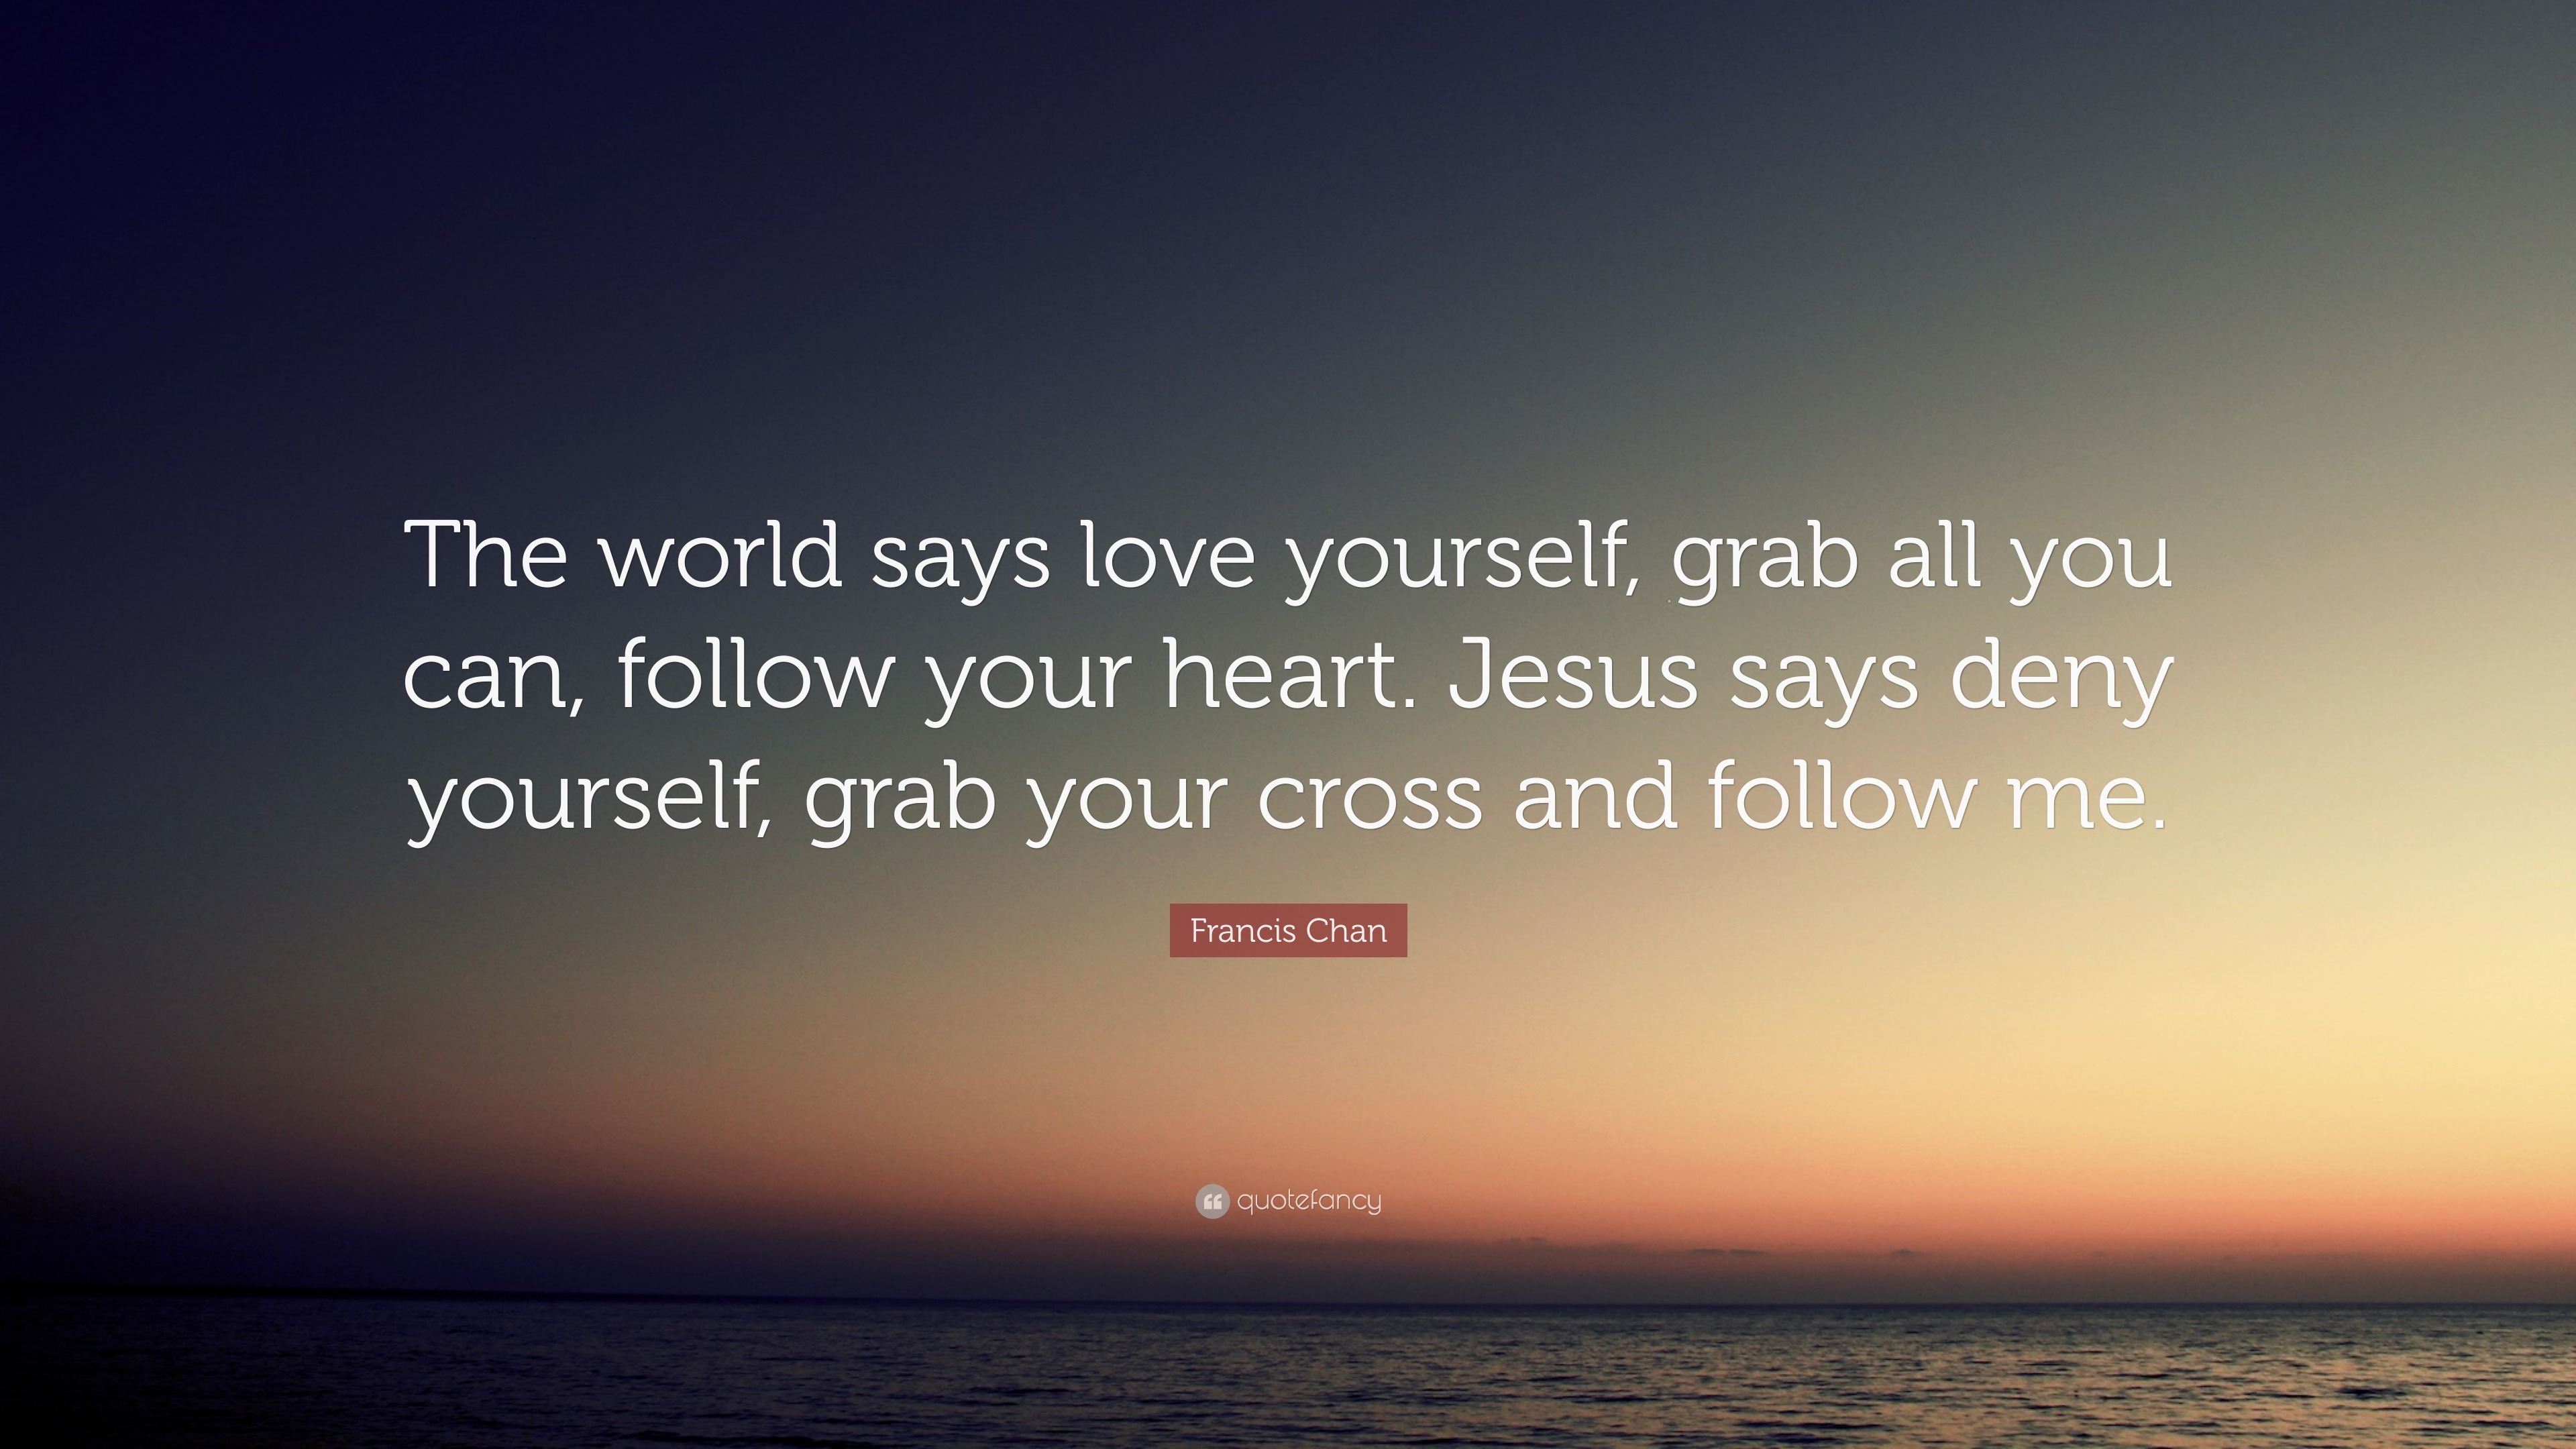 Francis Chan Quote “The world says love yourself grab all you can